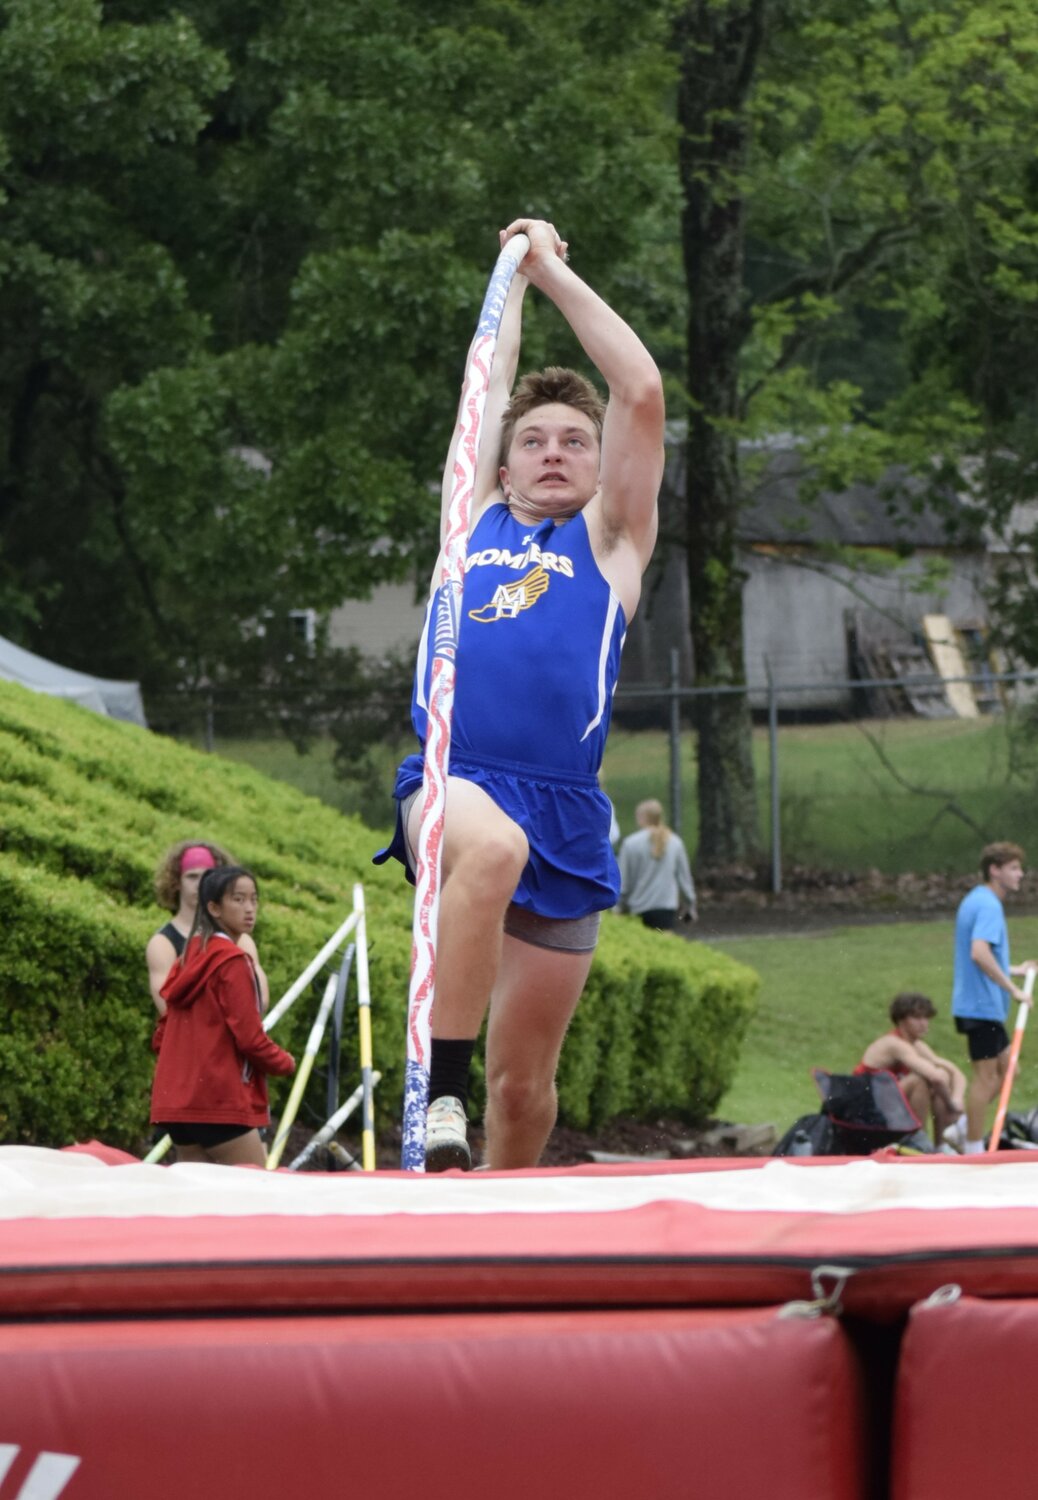 MH, YS, Salem athletes compete at Meet of Champs Baxter Bulletin